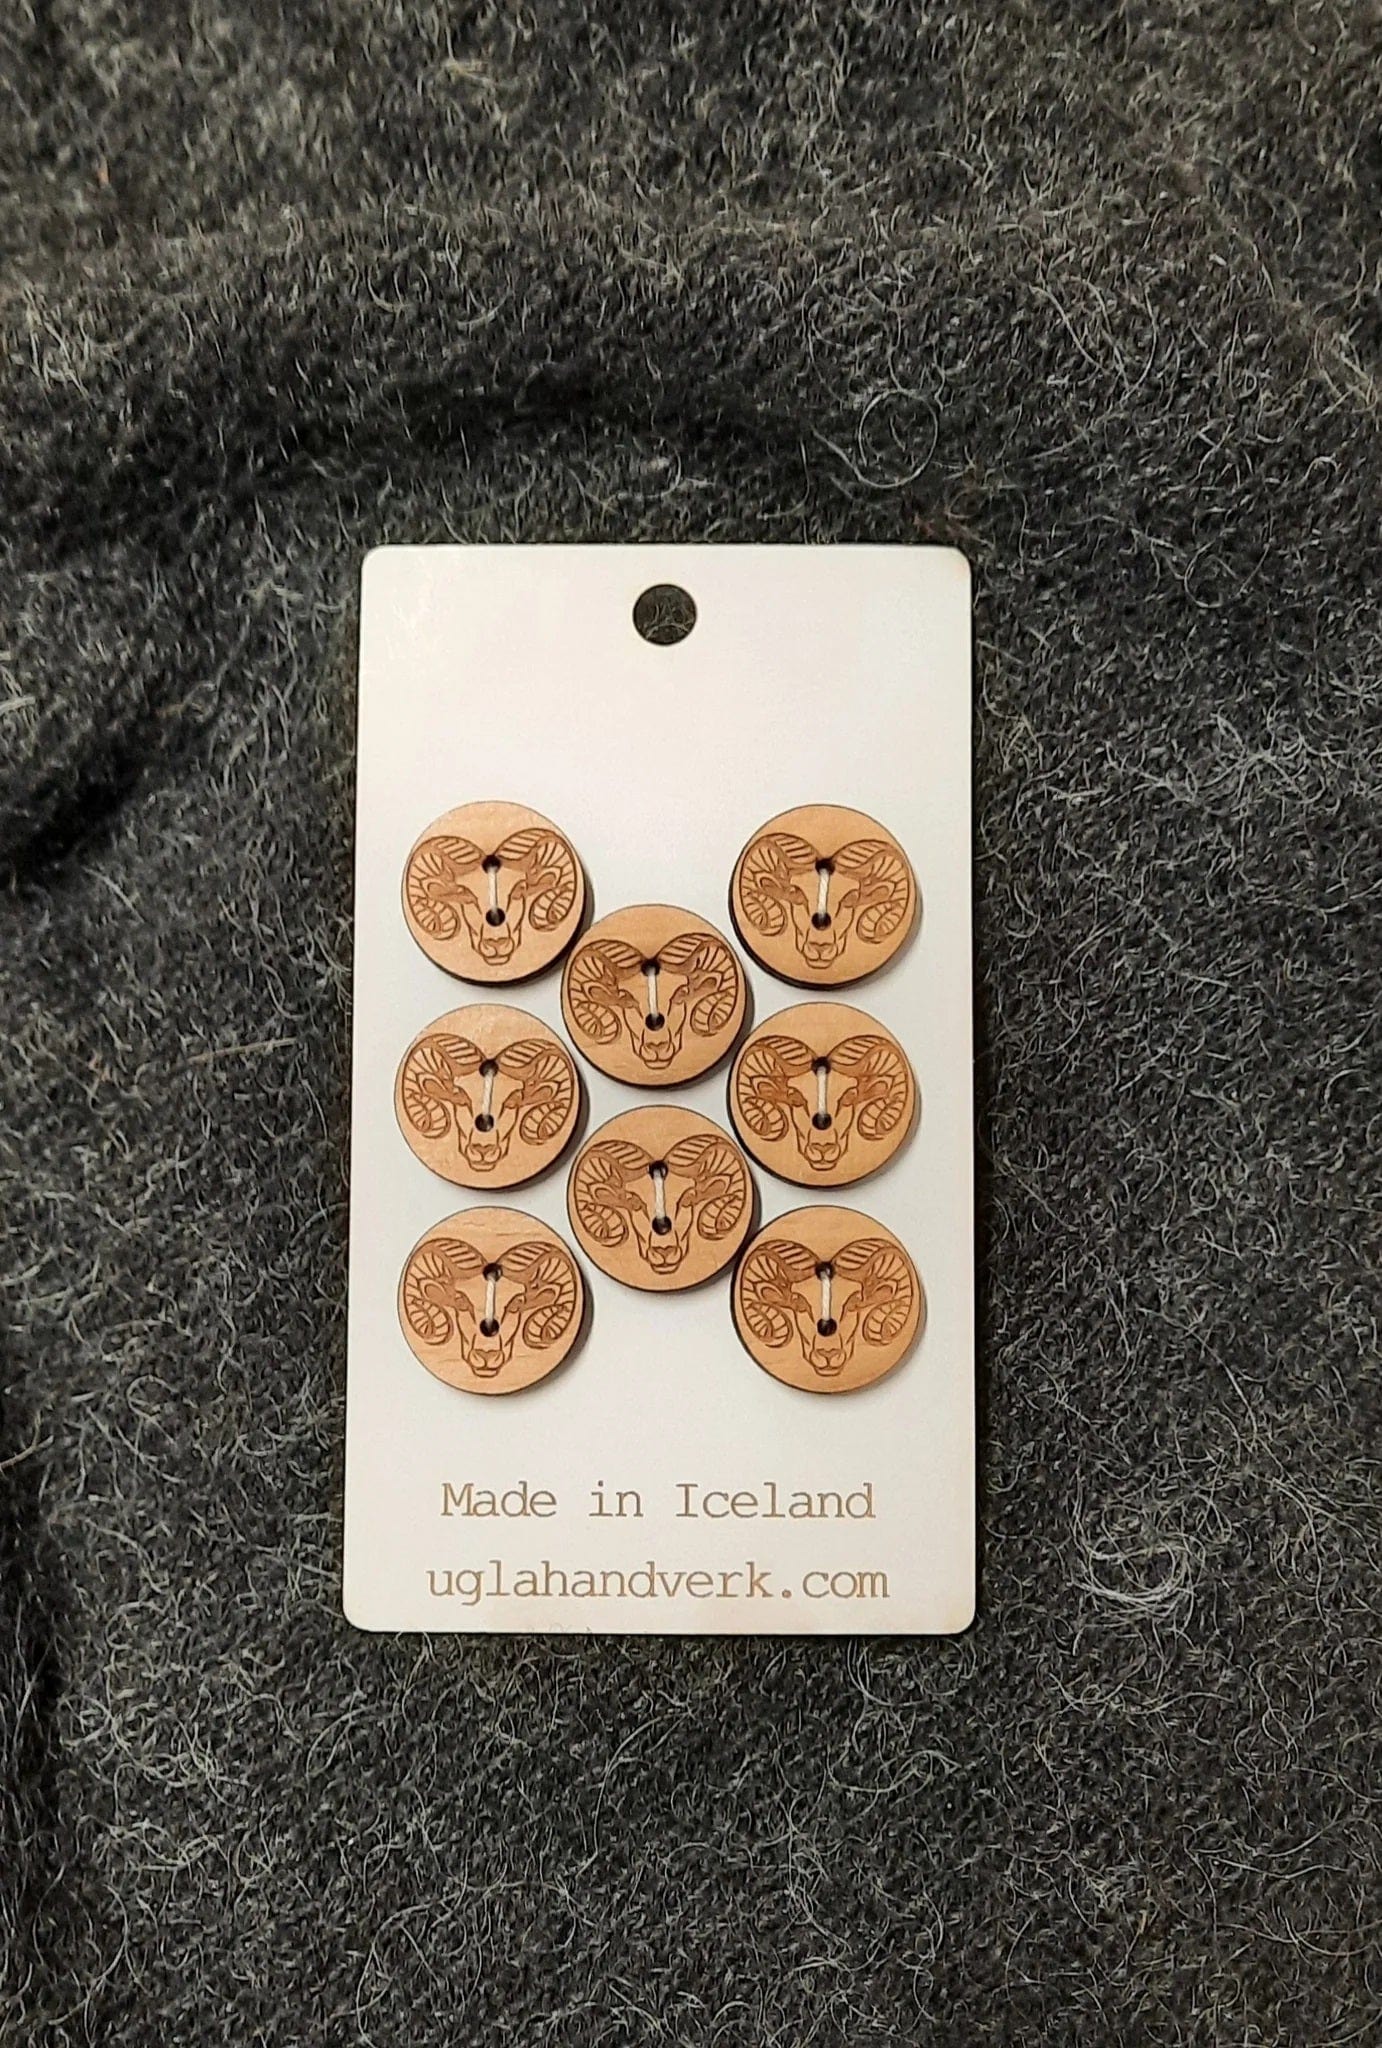 Handmade Wooden buttons Iceland. Icelandic sheep ram laser engraved in wood